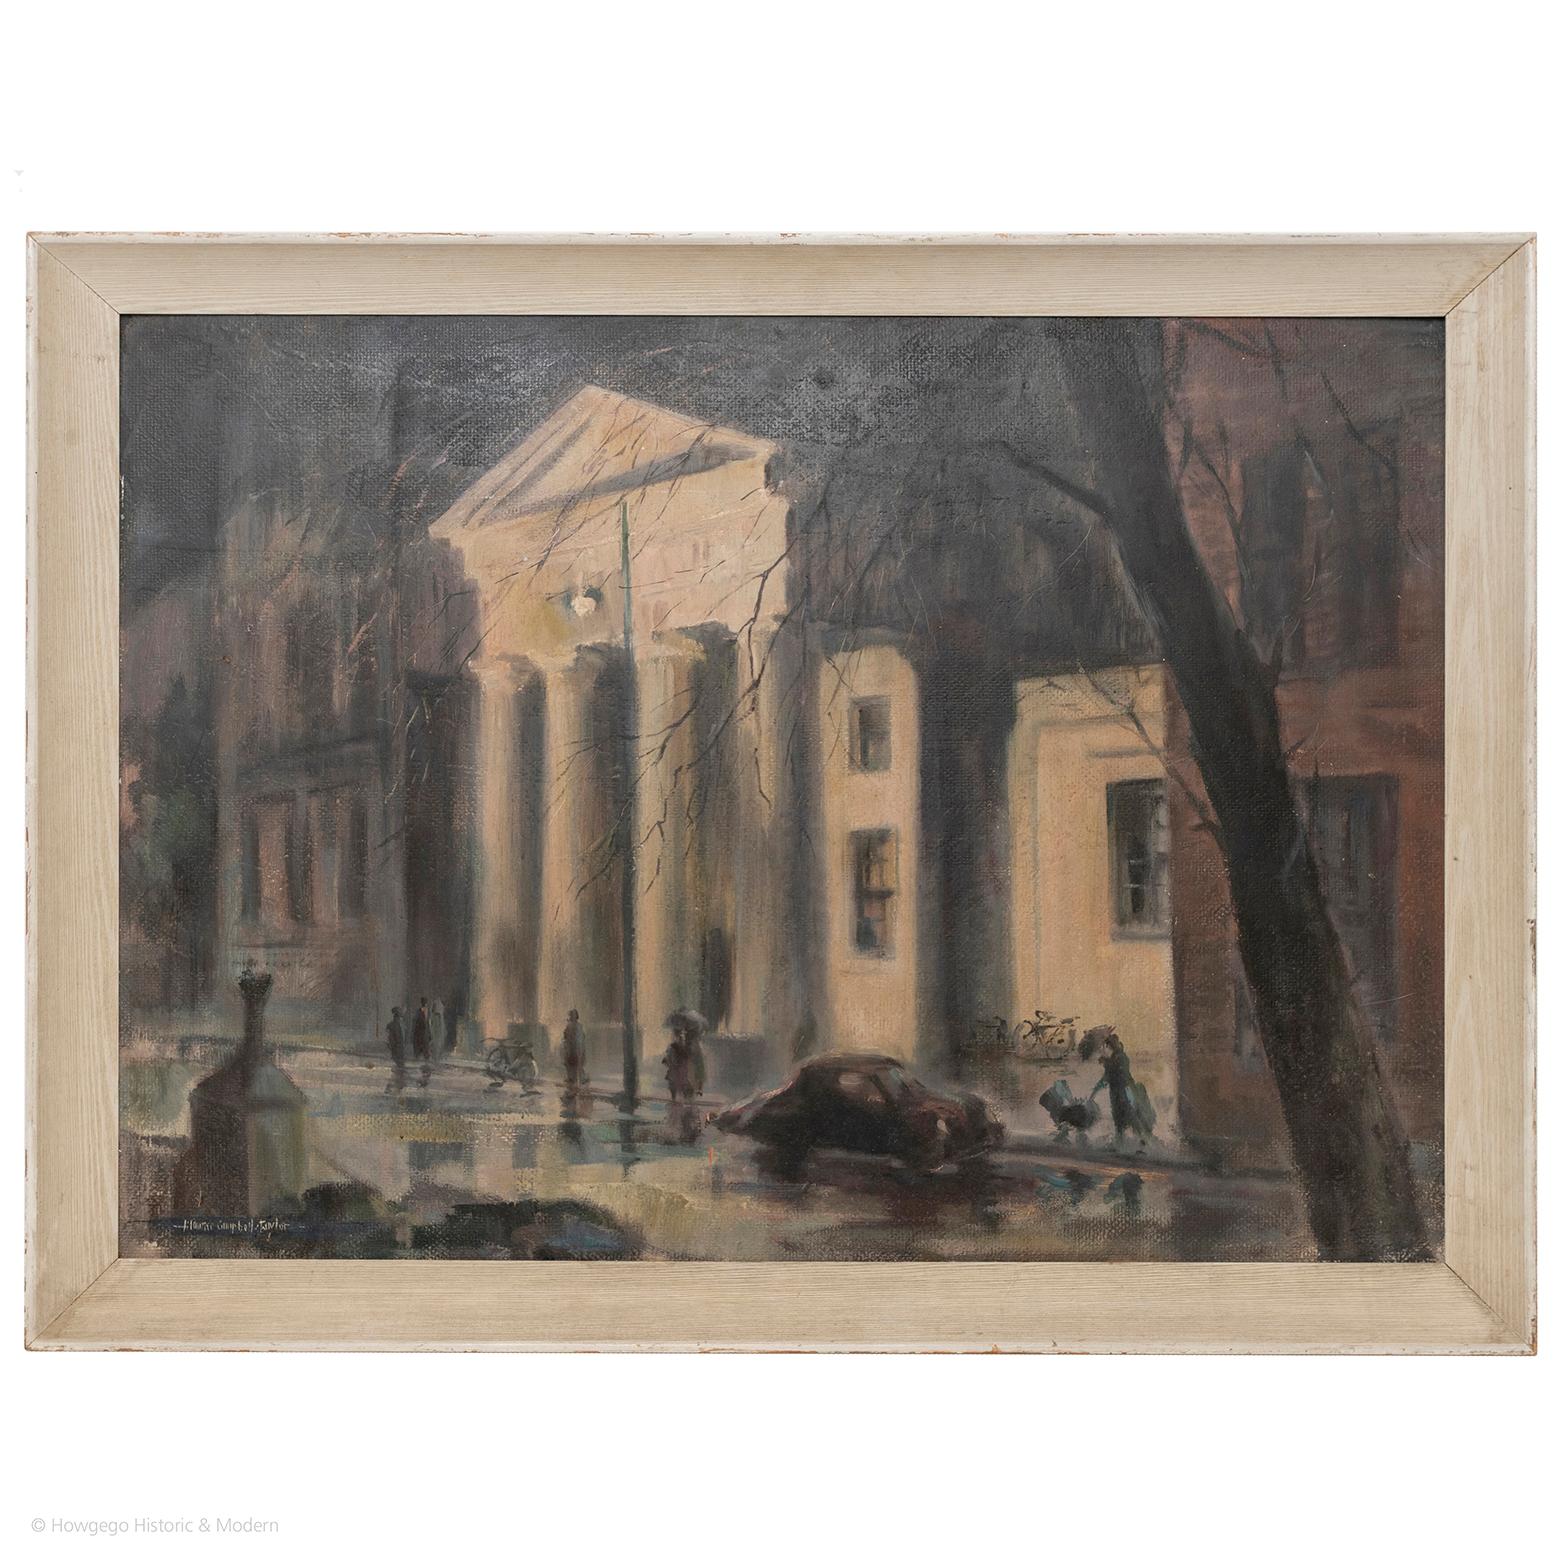 Maurice Campbell Taylor (b.1900) : Bedford Public Library 1955
Oil on artist's board
Signed lower left Maurice Campbell-Taylor
In original white painted frame
Measures: length 69cm., 27